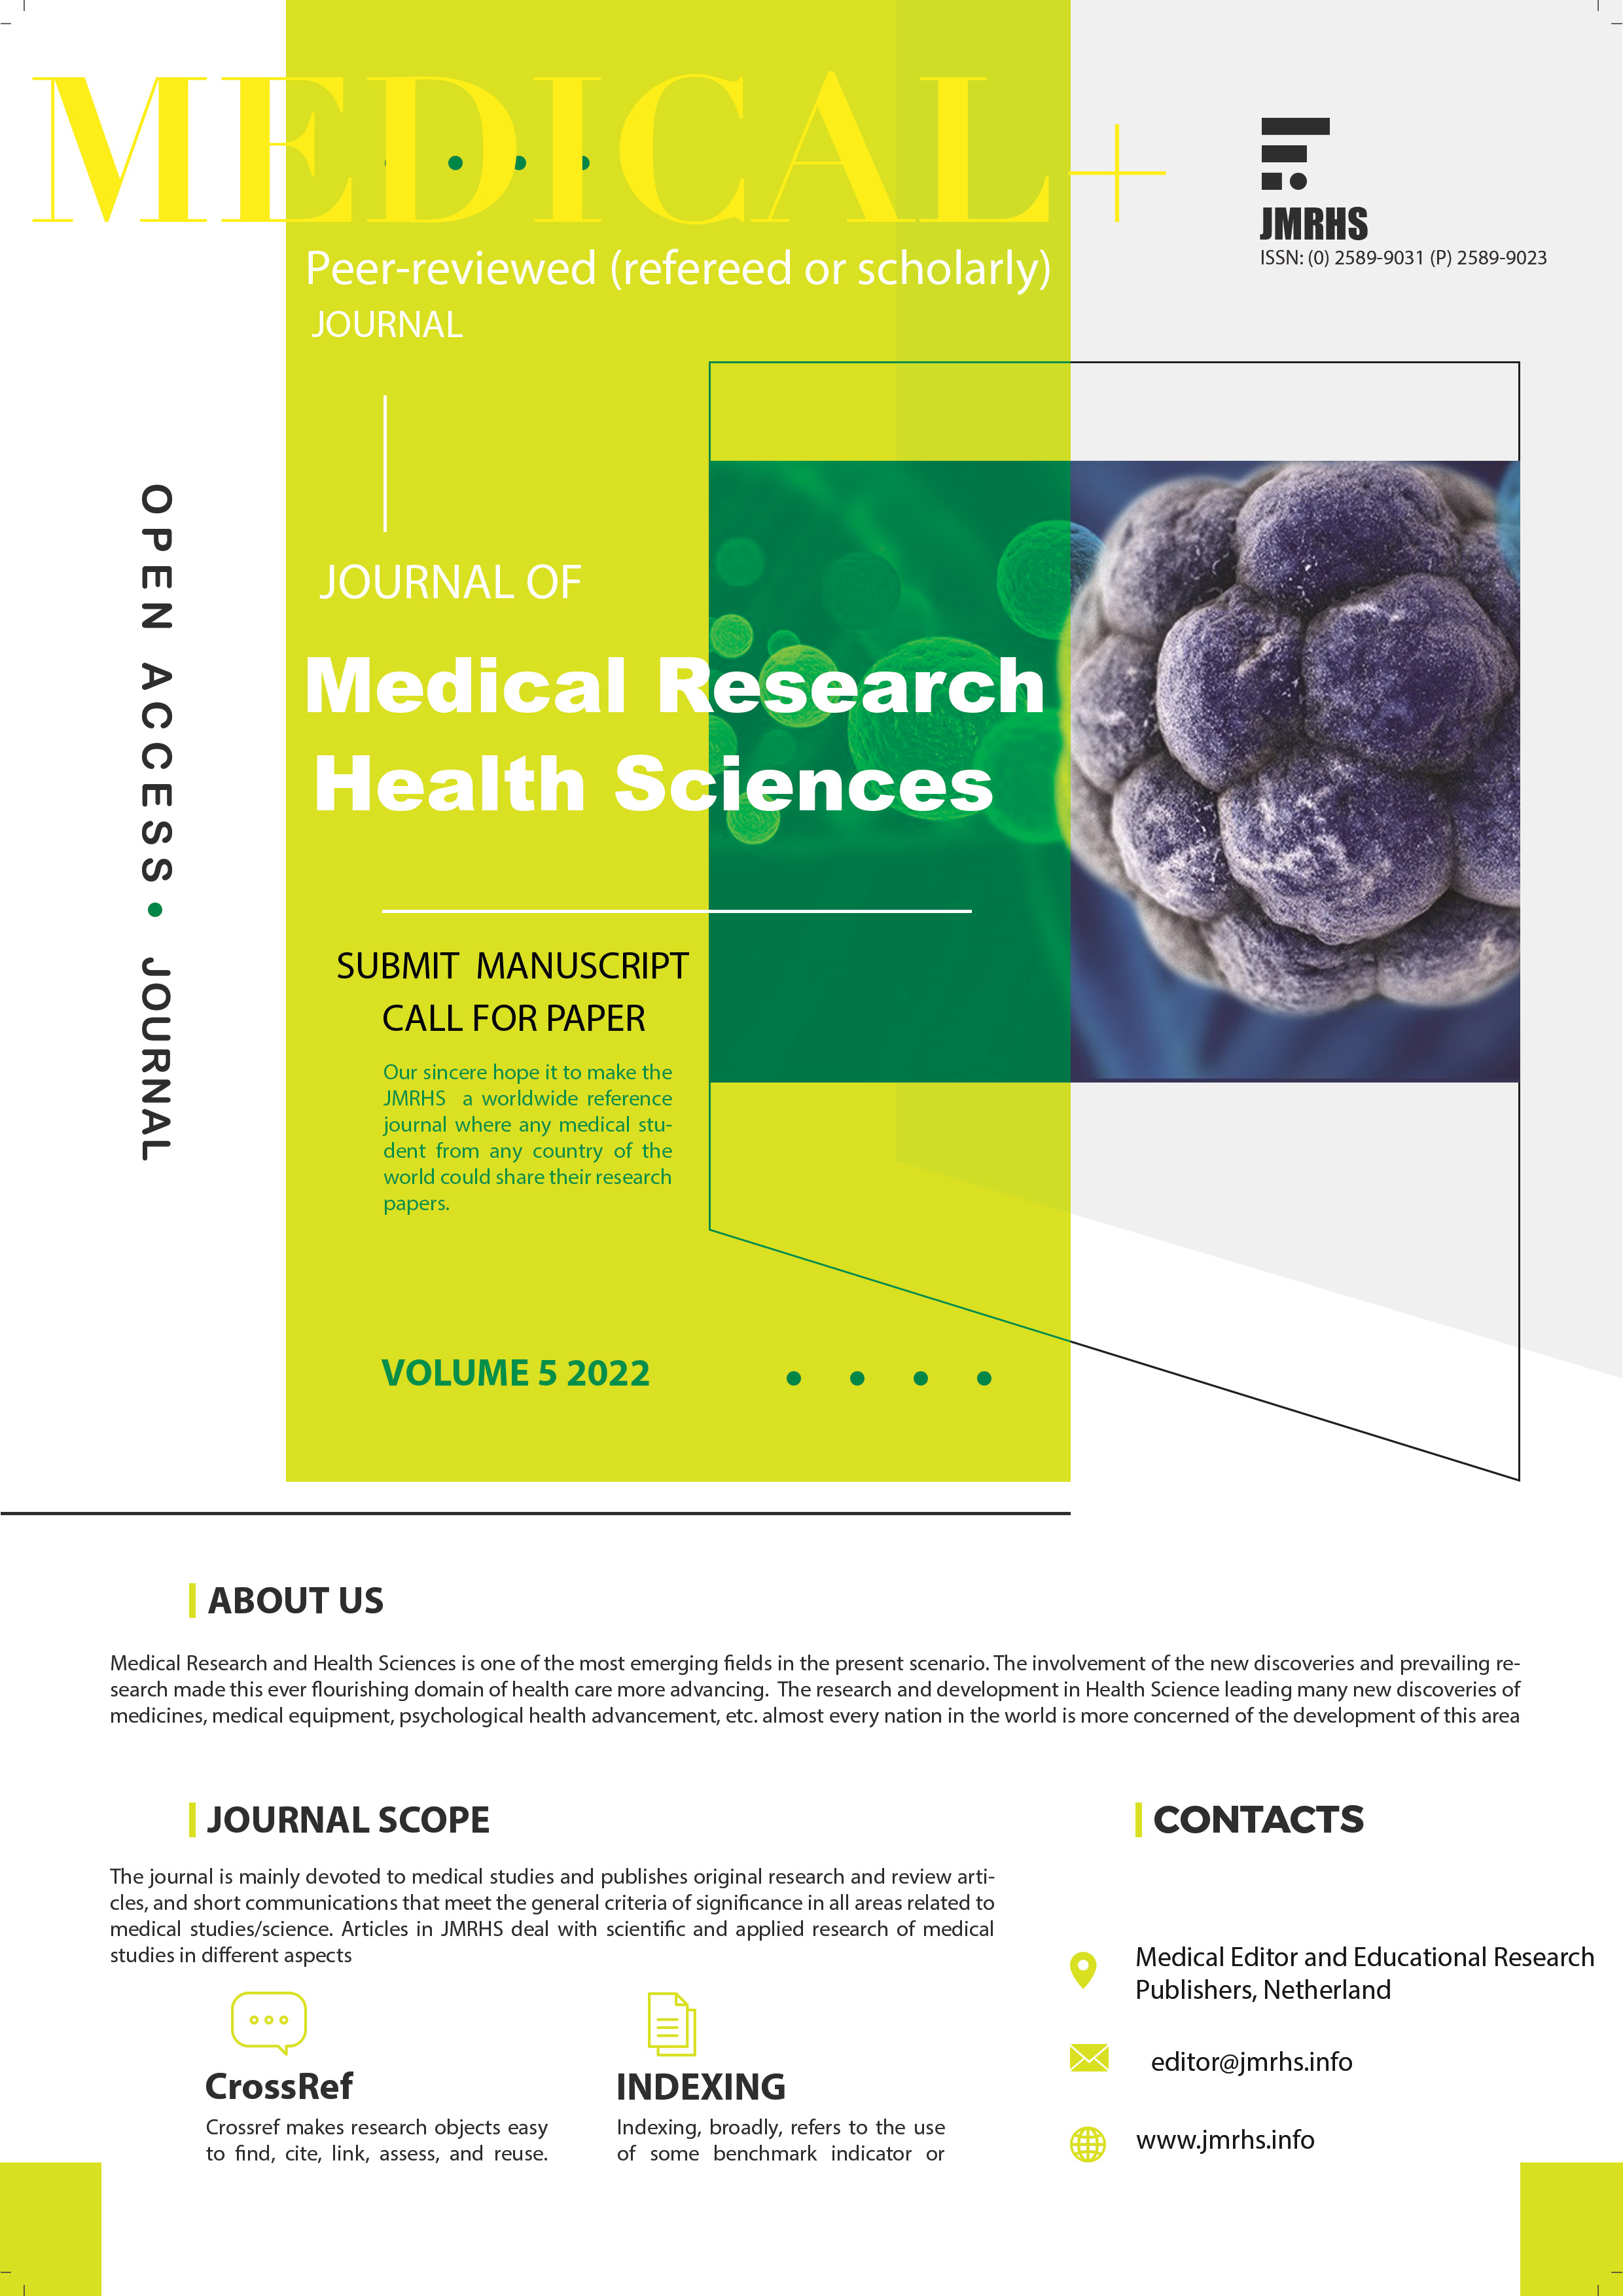 journal of medical research and health sciences